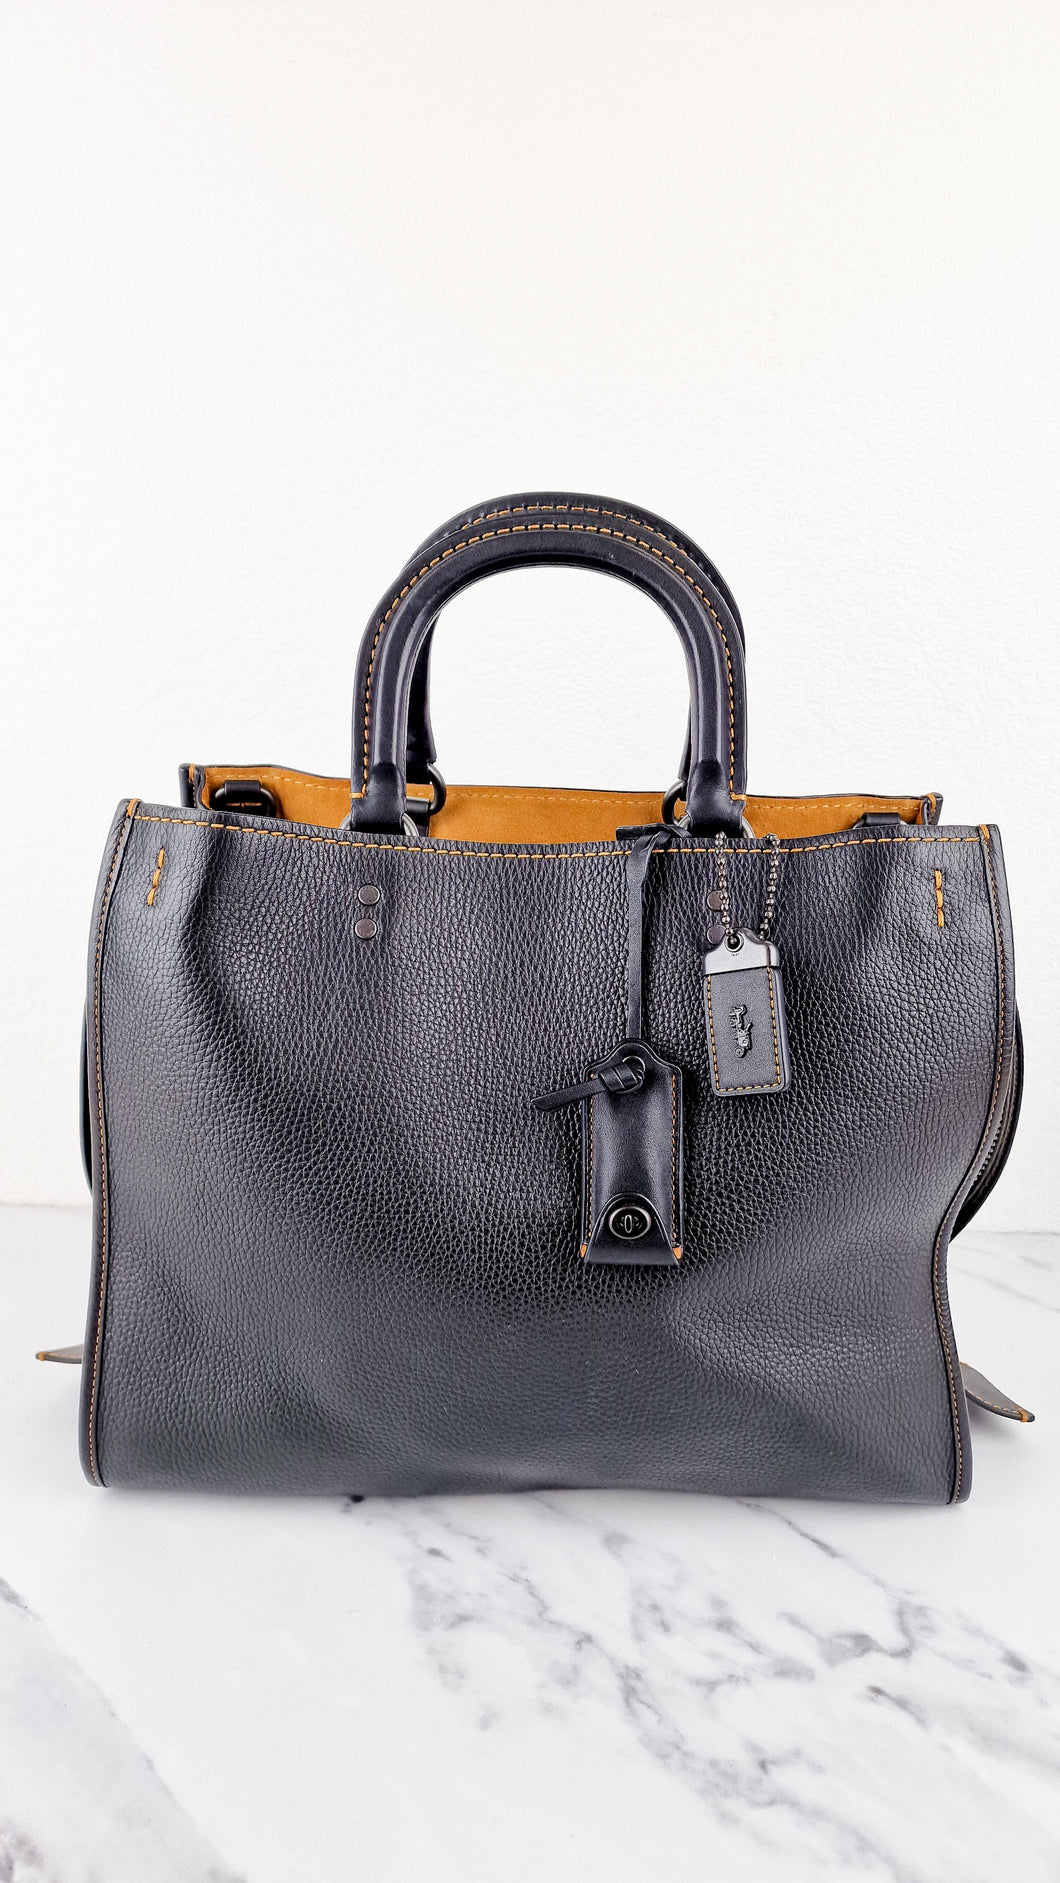 Coach 1941 Rogue 36 Bag in Black Pebble Leather with Honey Suede -  Coach 54556 - Classic Handbag